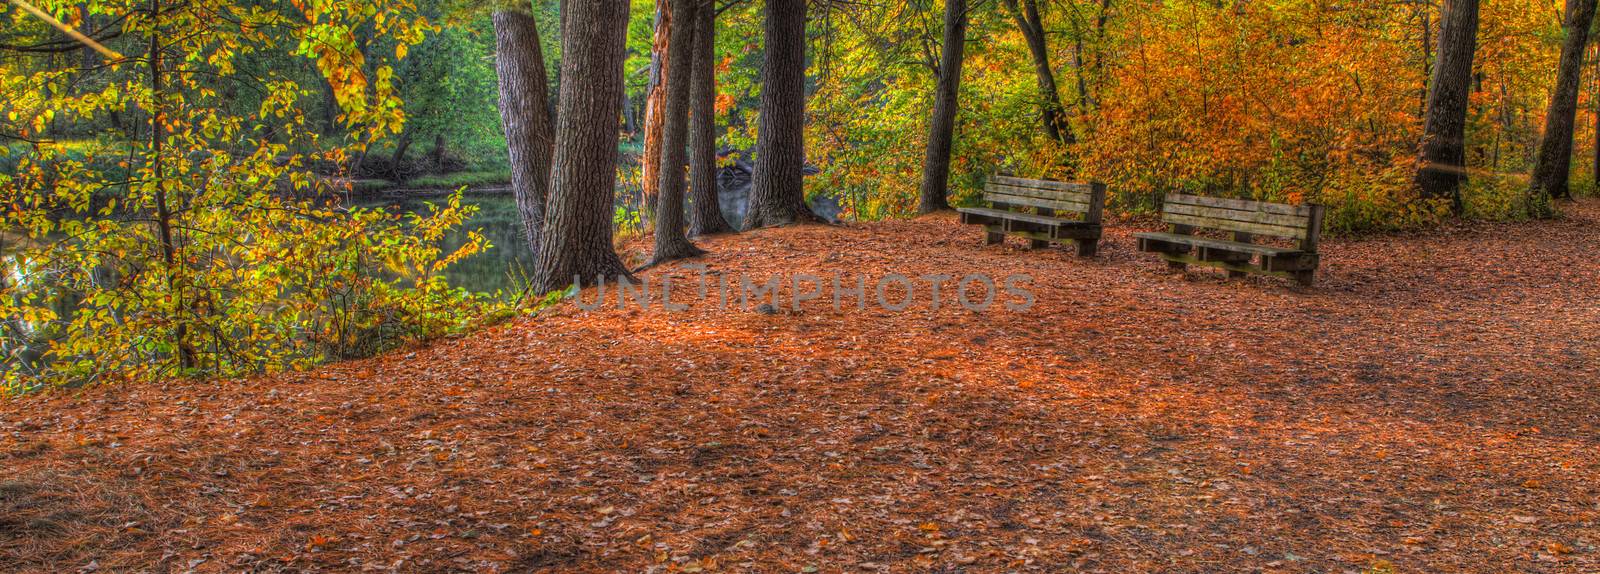 Colorful scenic Landscape in High Dynamic Range with bench